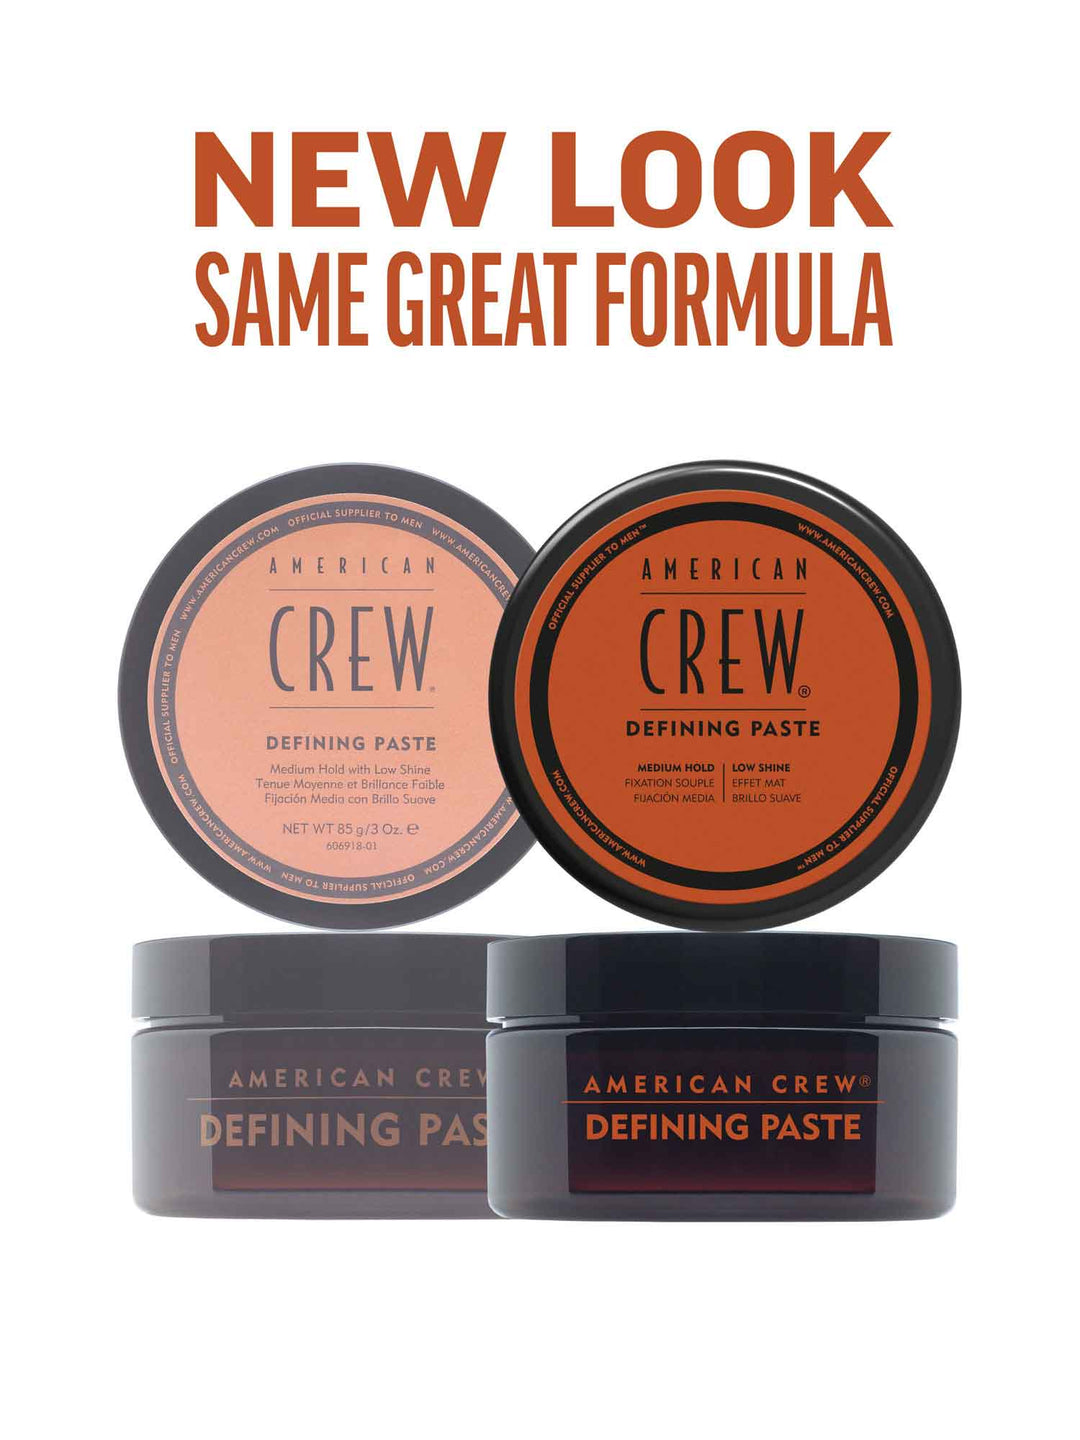 Defining Paste styling puck. New look, same great formula